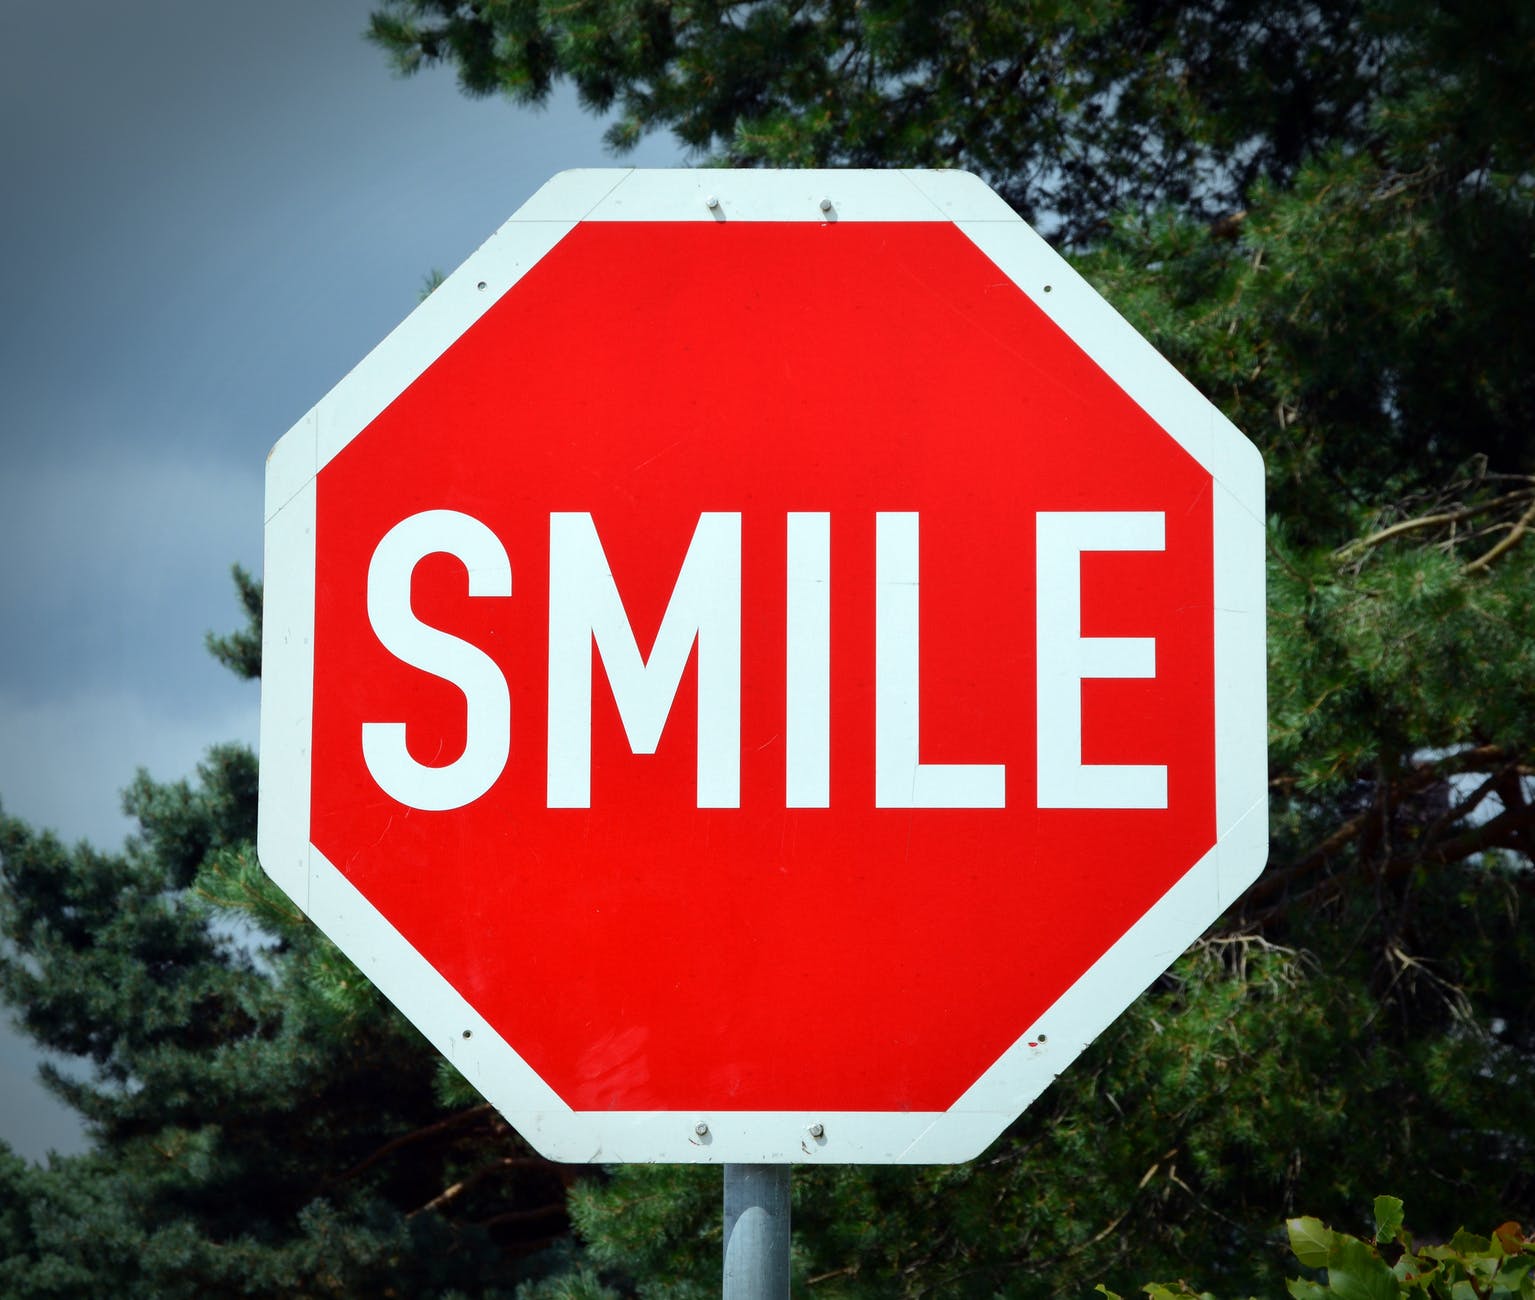 A red traffic stop sign with the word 'smile' on it